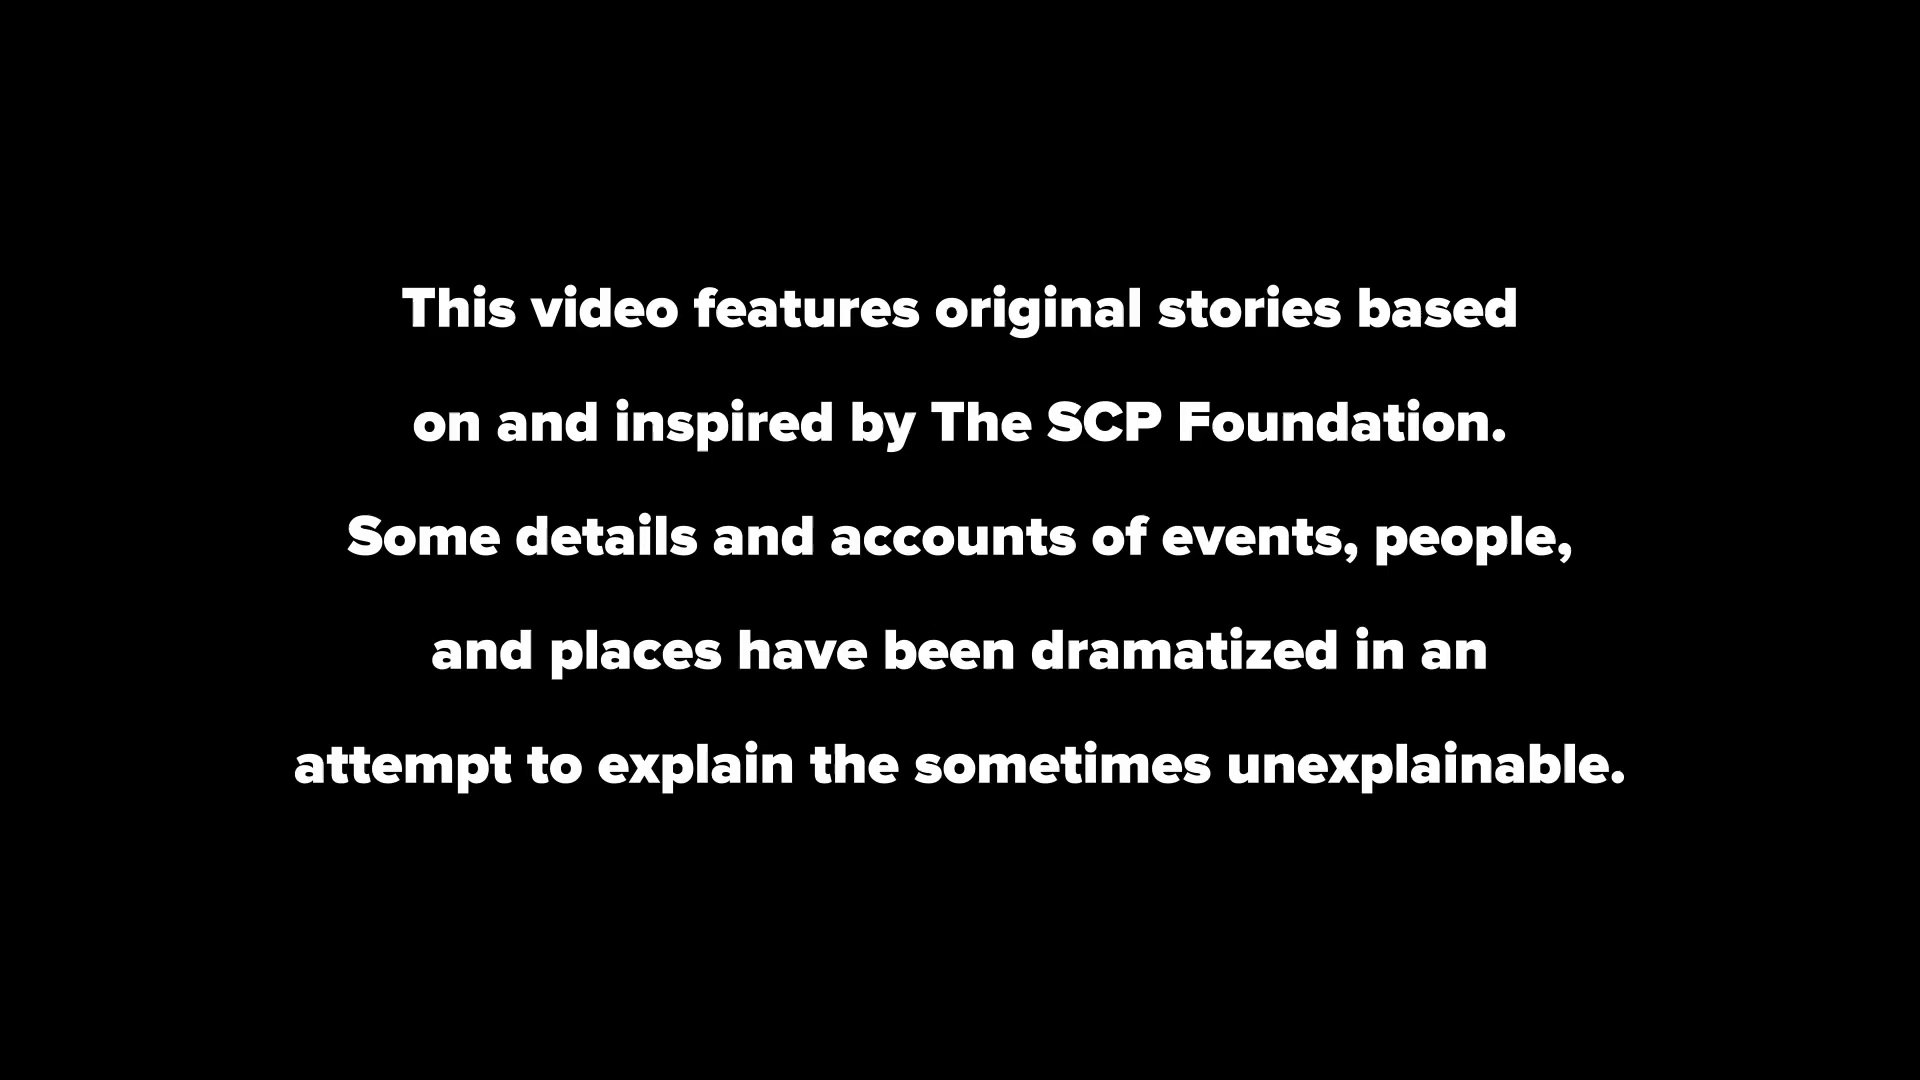 SCP-3008 - Trapped in IKEA (SCP Animation & Story)  SCP-3008 is SCP  Foundation Euclid Object. Today, SCP Explained - Story & Animation is  bringing you SCP-3008 animated tale. SCP 3008 is